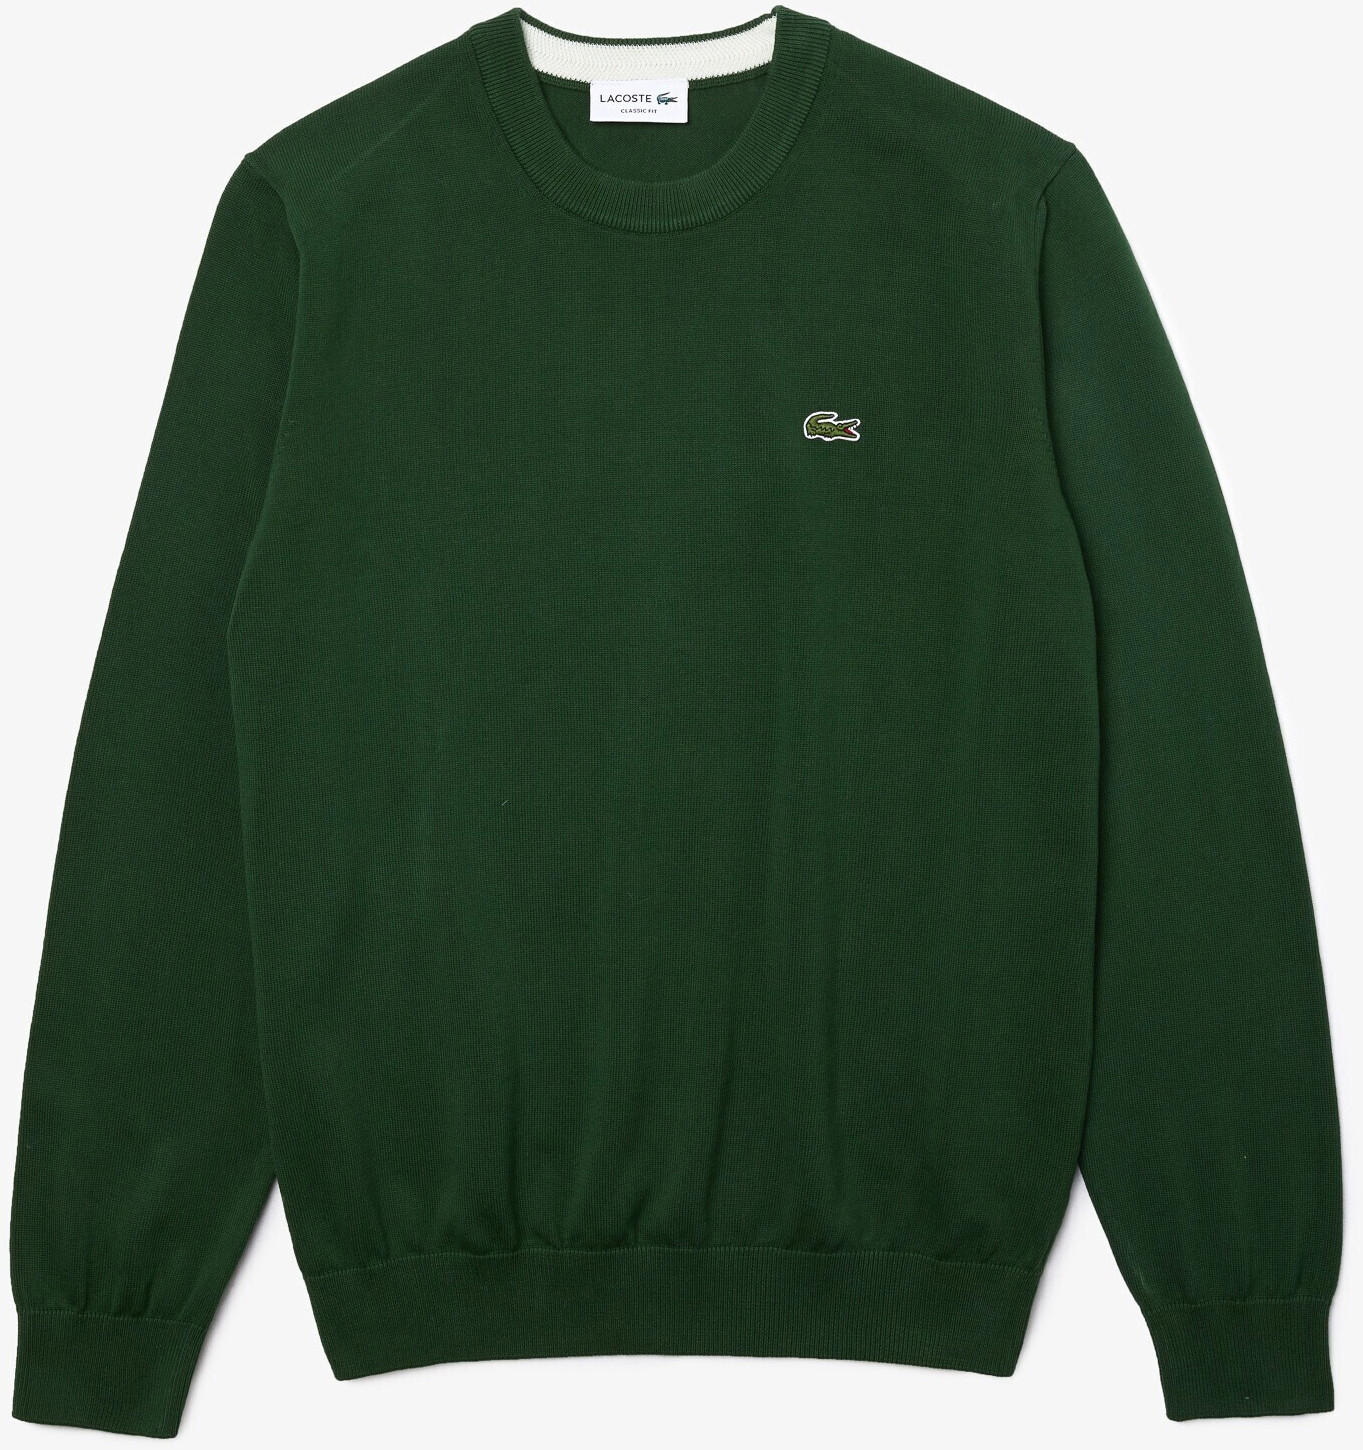 Lacoste Sweater Classic Fit Crew Neck Organic Cotton green